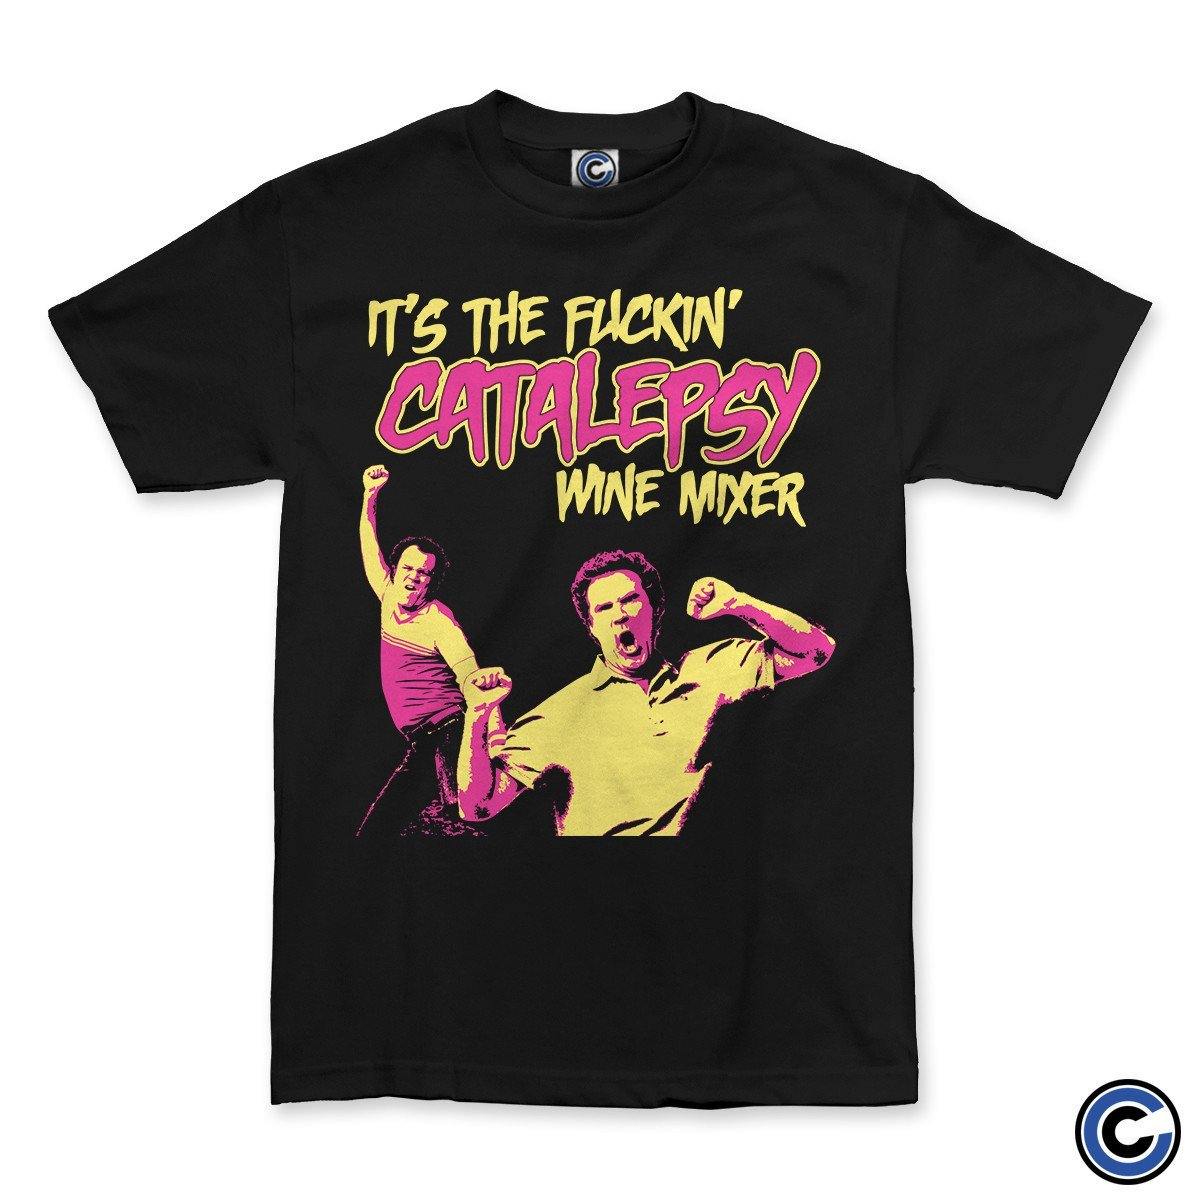 Buy – Catalepsy "Step Brothers" Shirt – Band & Music Merch – Cold Cuts Merch